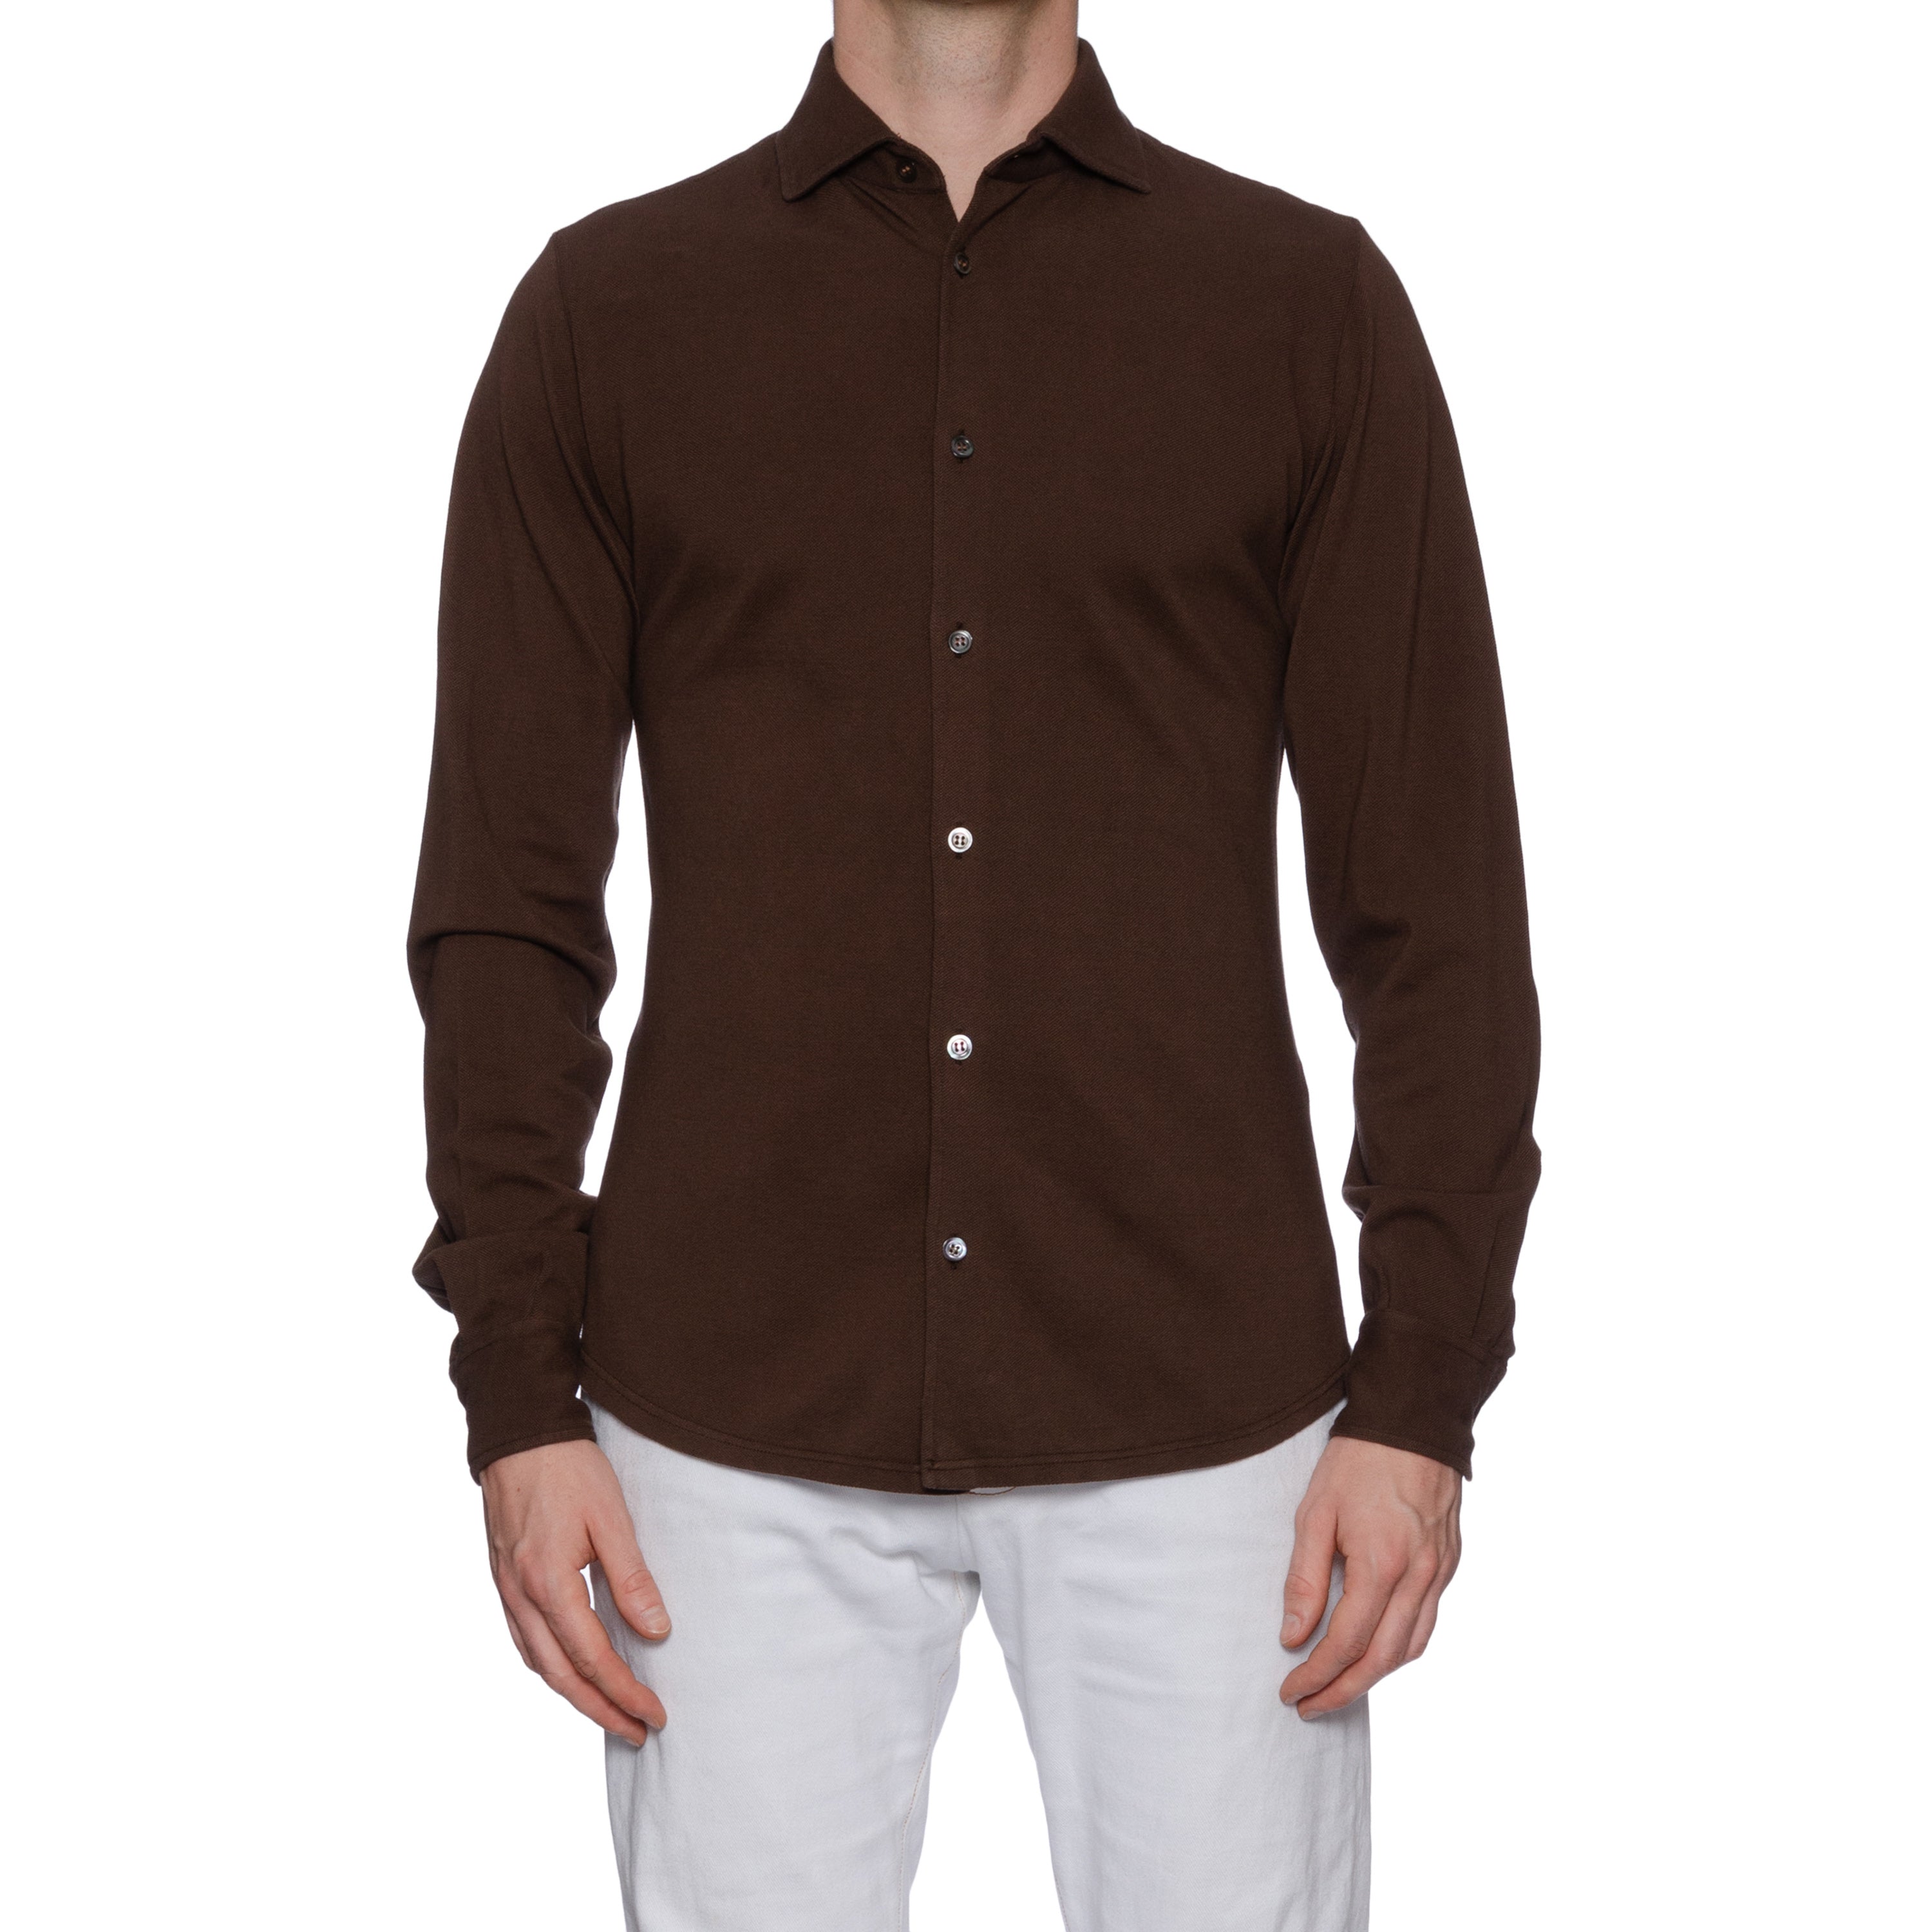 FEDELI Italy Brown "Dusty System" Cotton Pique Shirt EU 46 NEW US XS